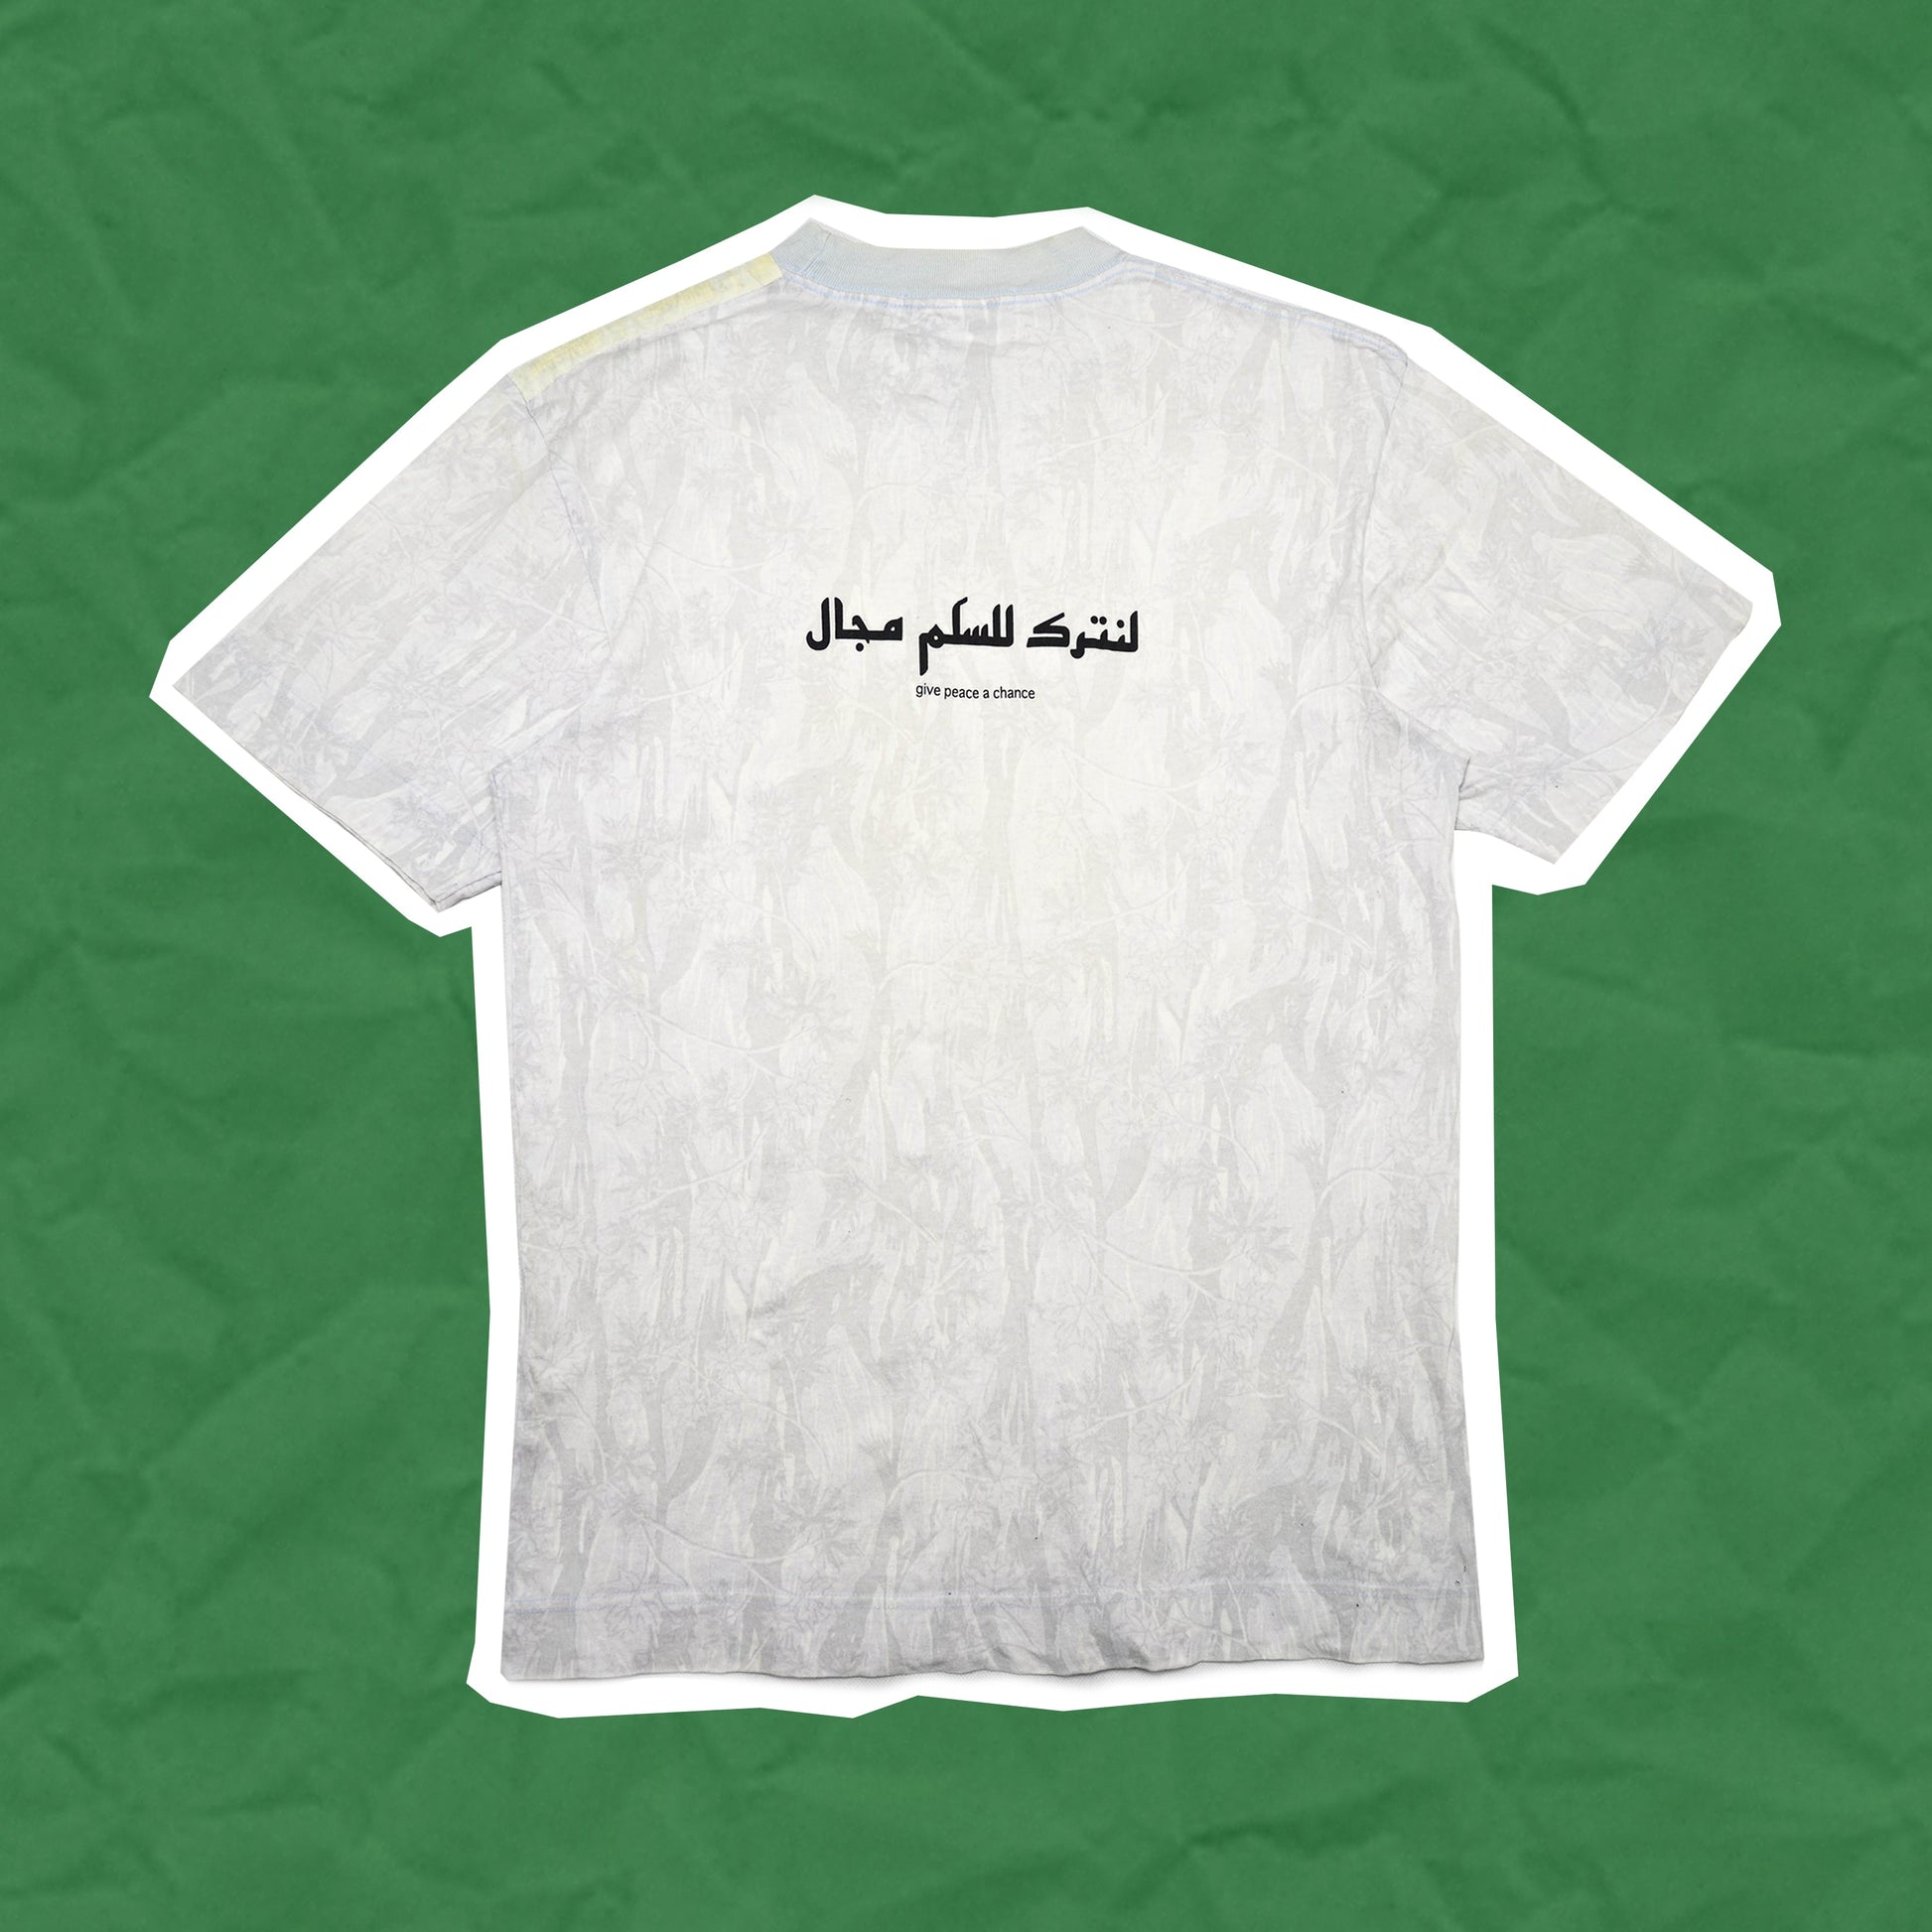 General Research "Go to woods" / "Give peace a chance" Arabic Subtle Tonal Camo T shirt (M)